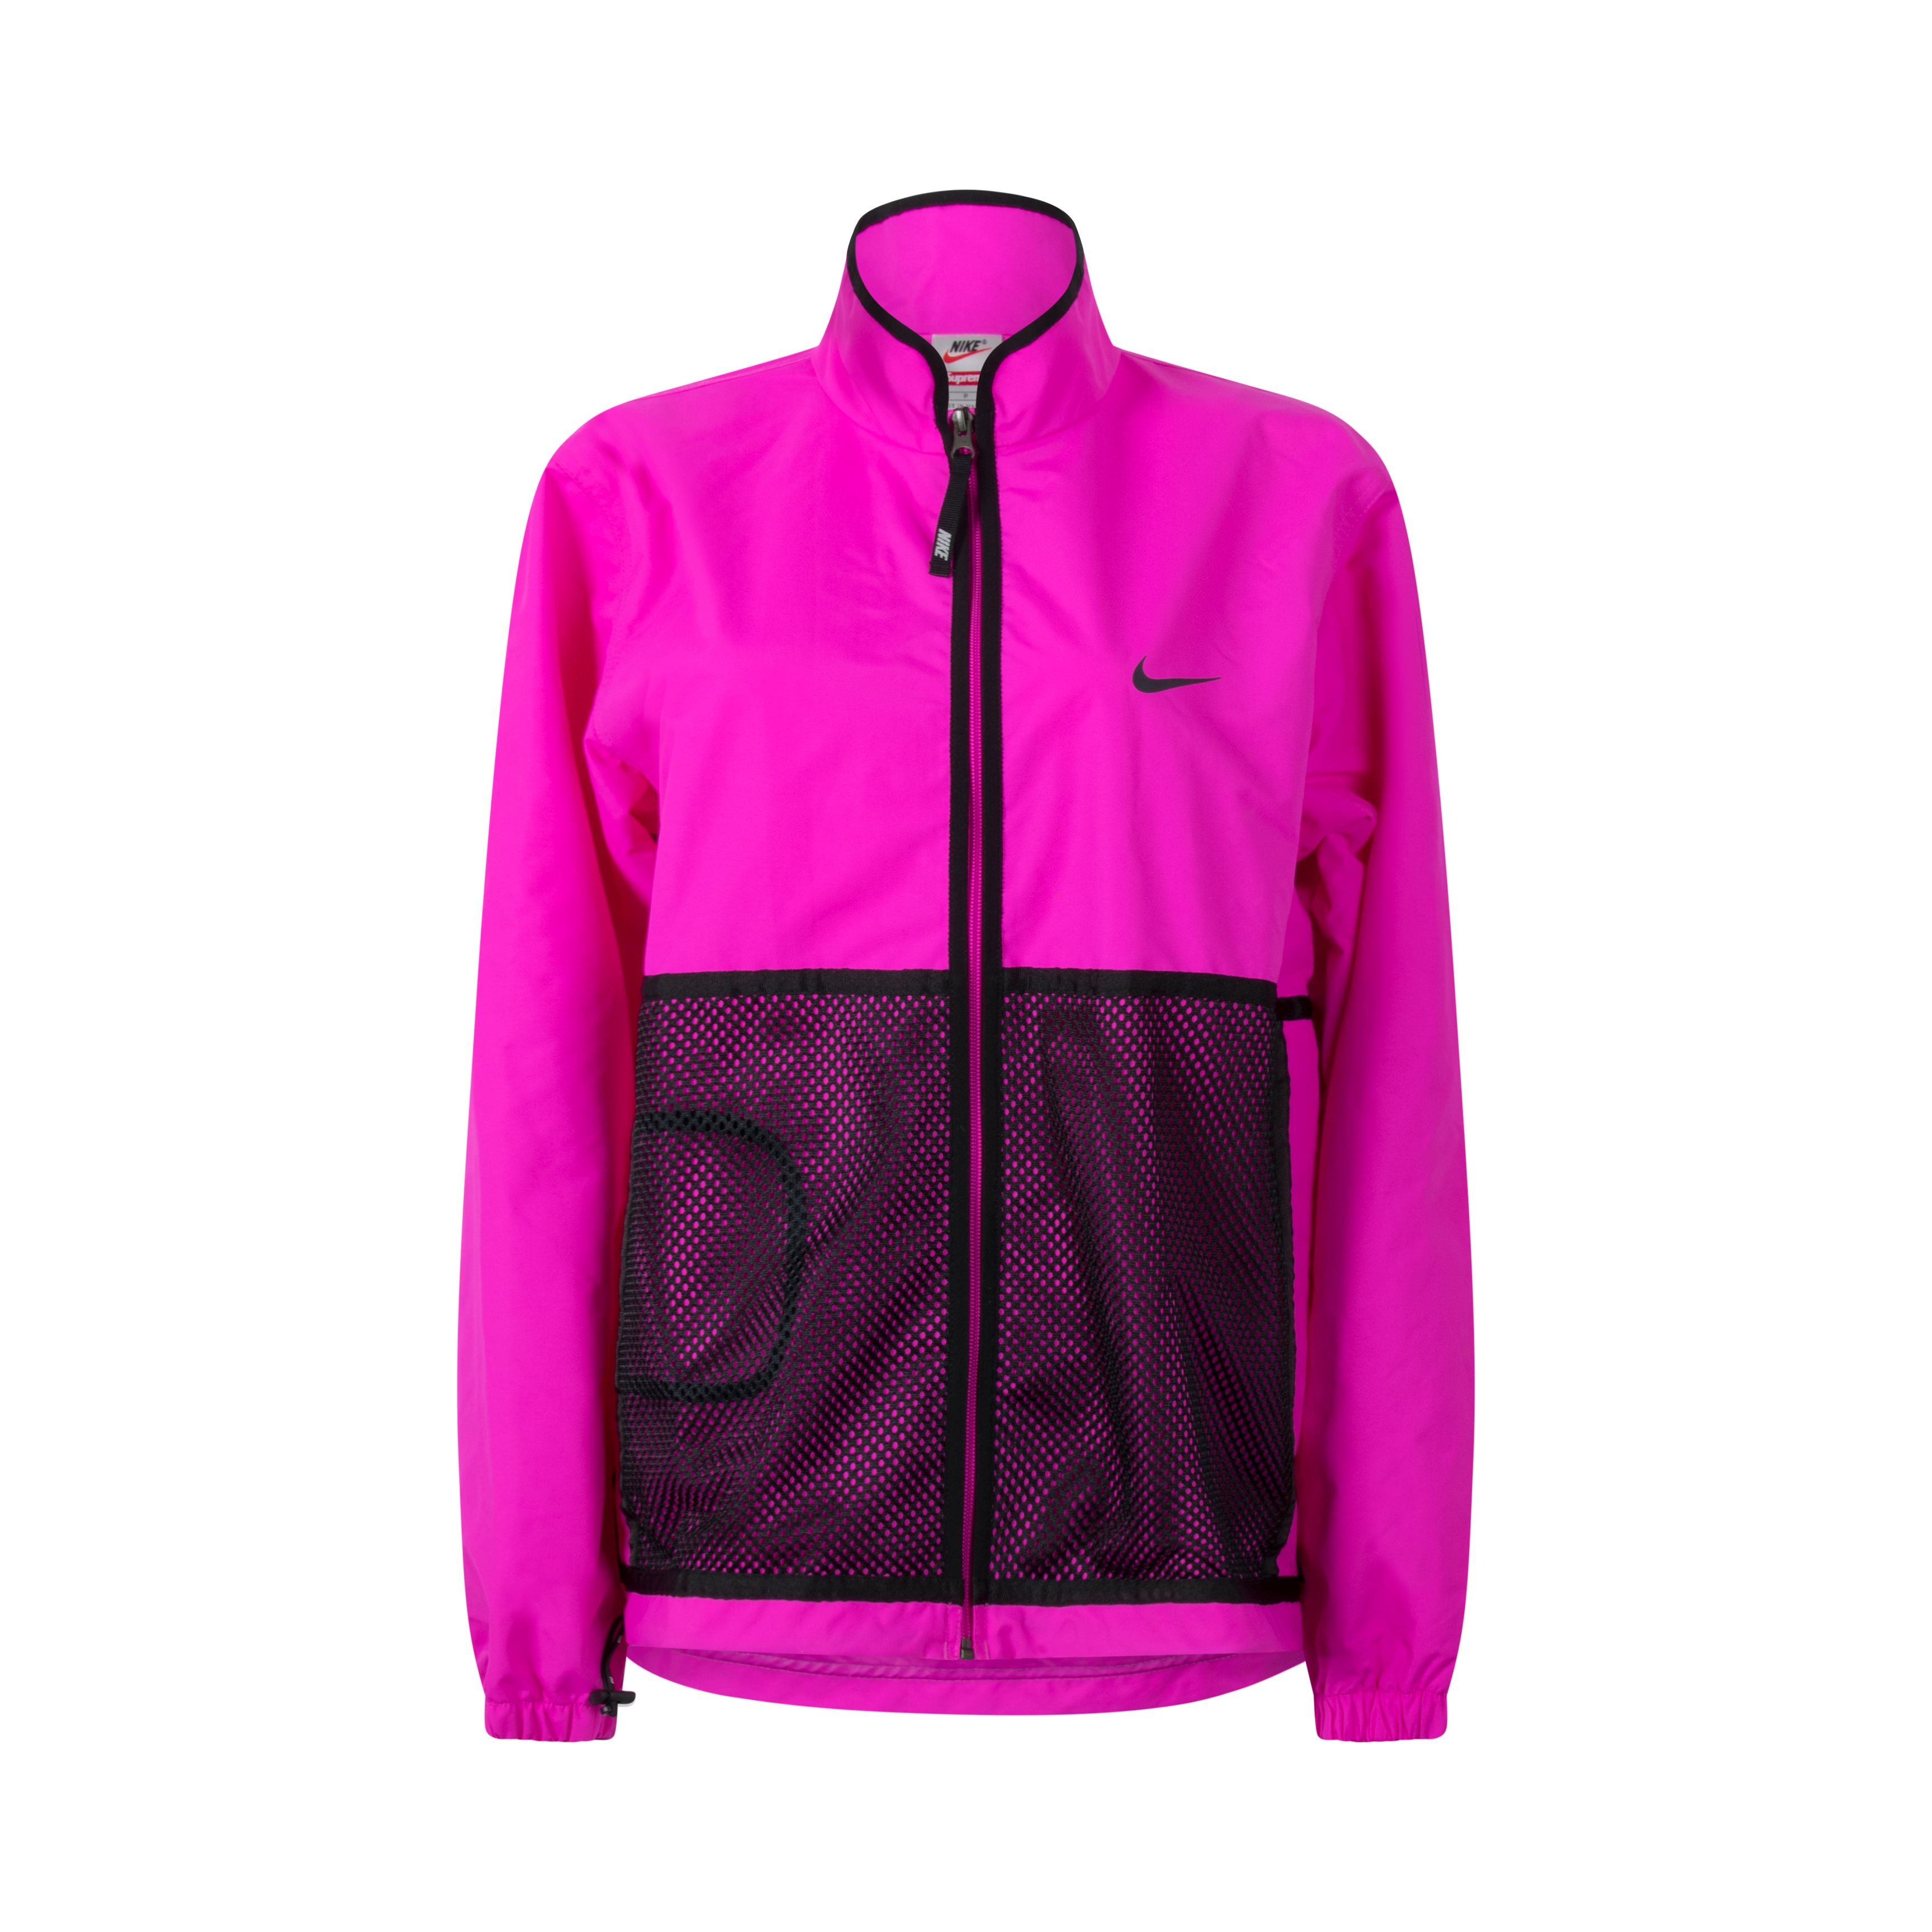 Supreme Nike Trail Running Jacket -Pink by Emily Oberg | Basic.Space